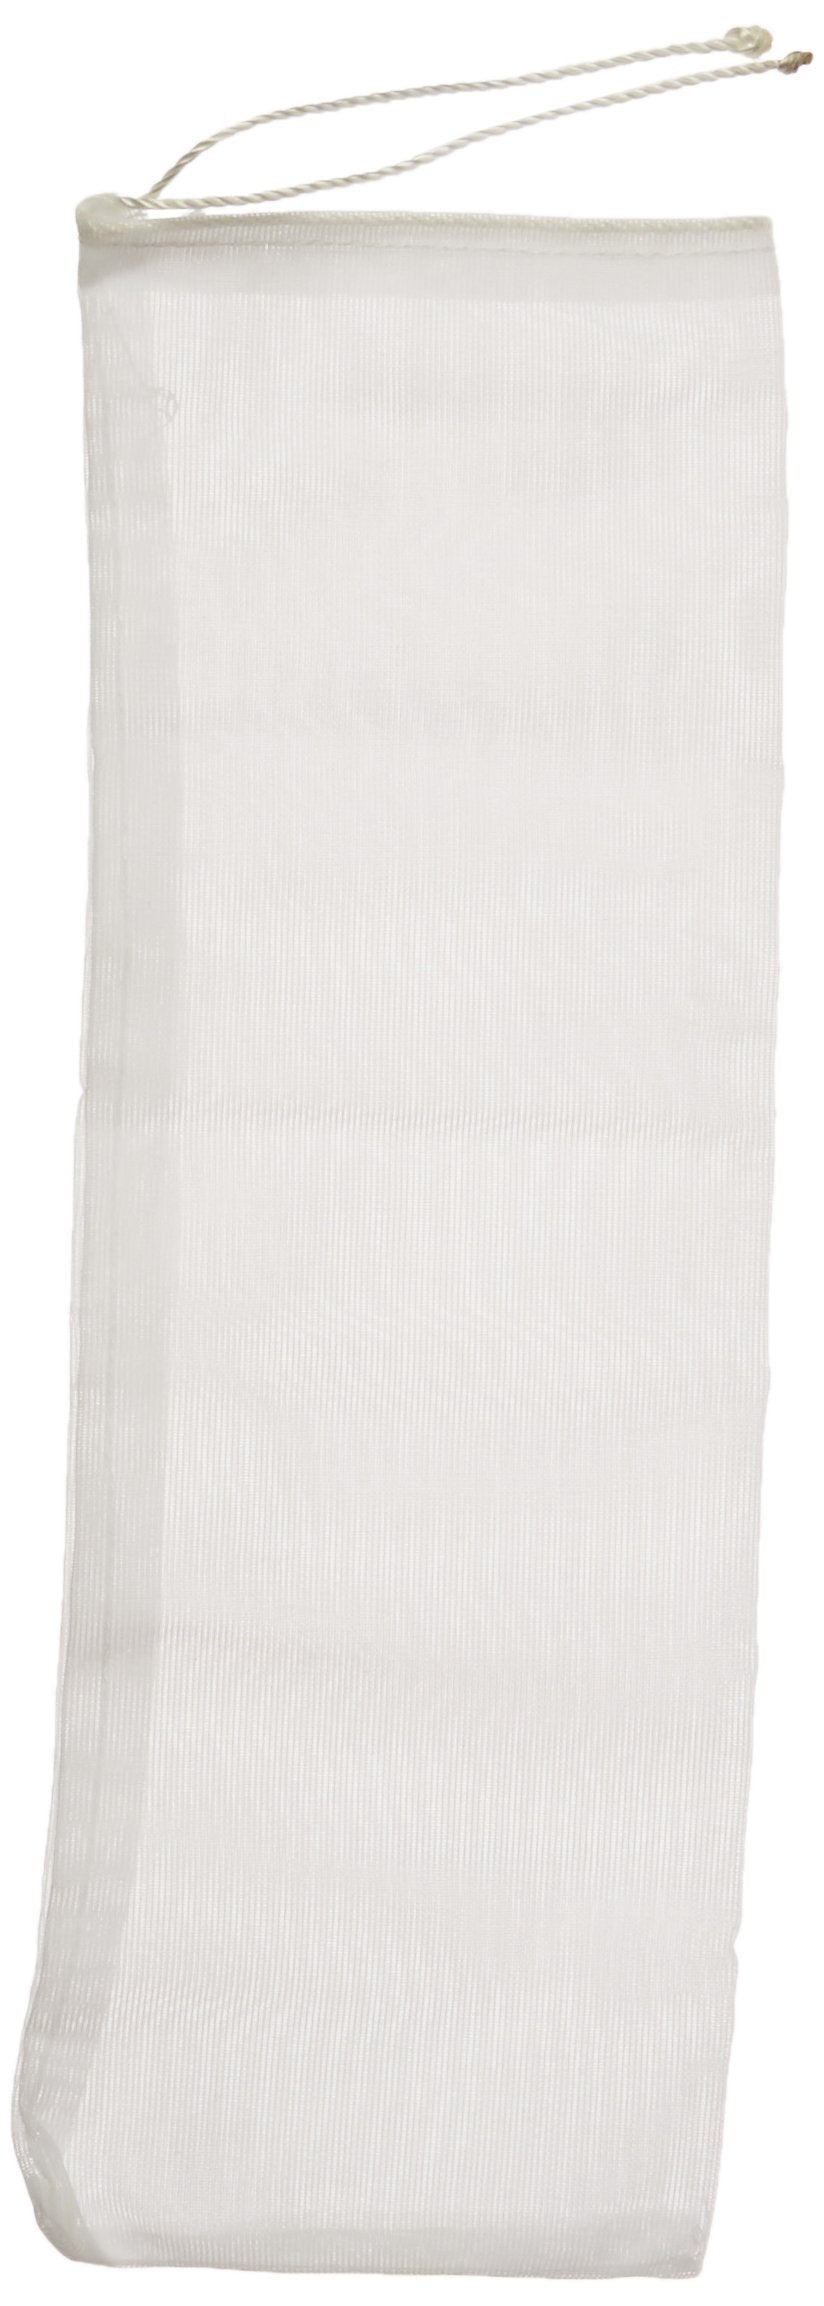 [Australia] - Lee's Pet Products ALE13020 Filter Saver Bag for Aquarium Filter, 4 by 12-Inch 